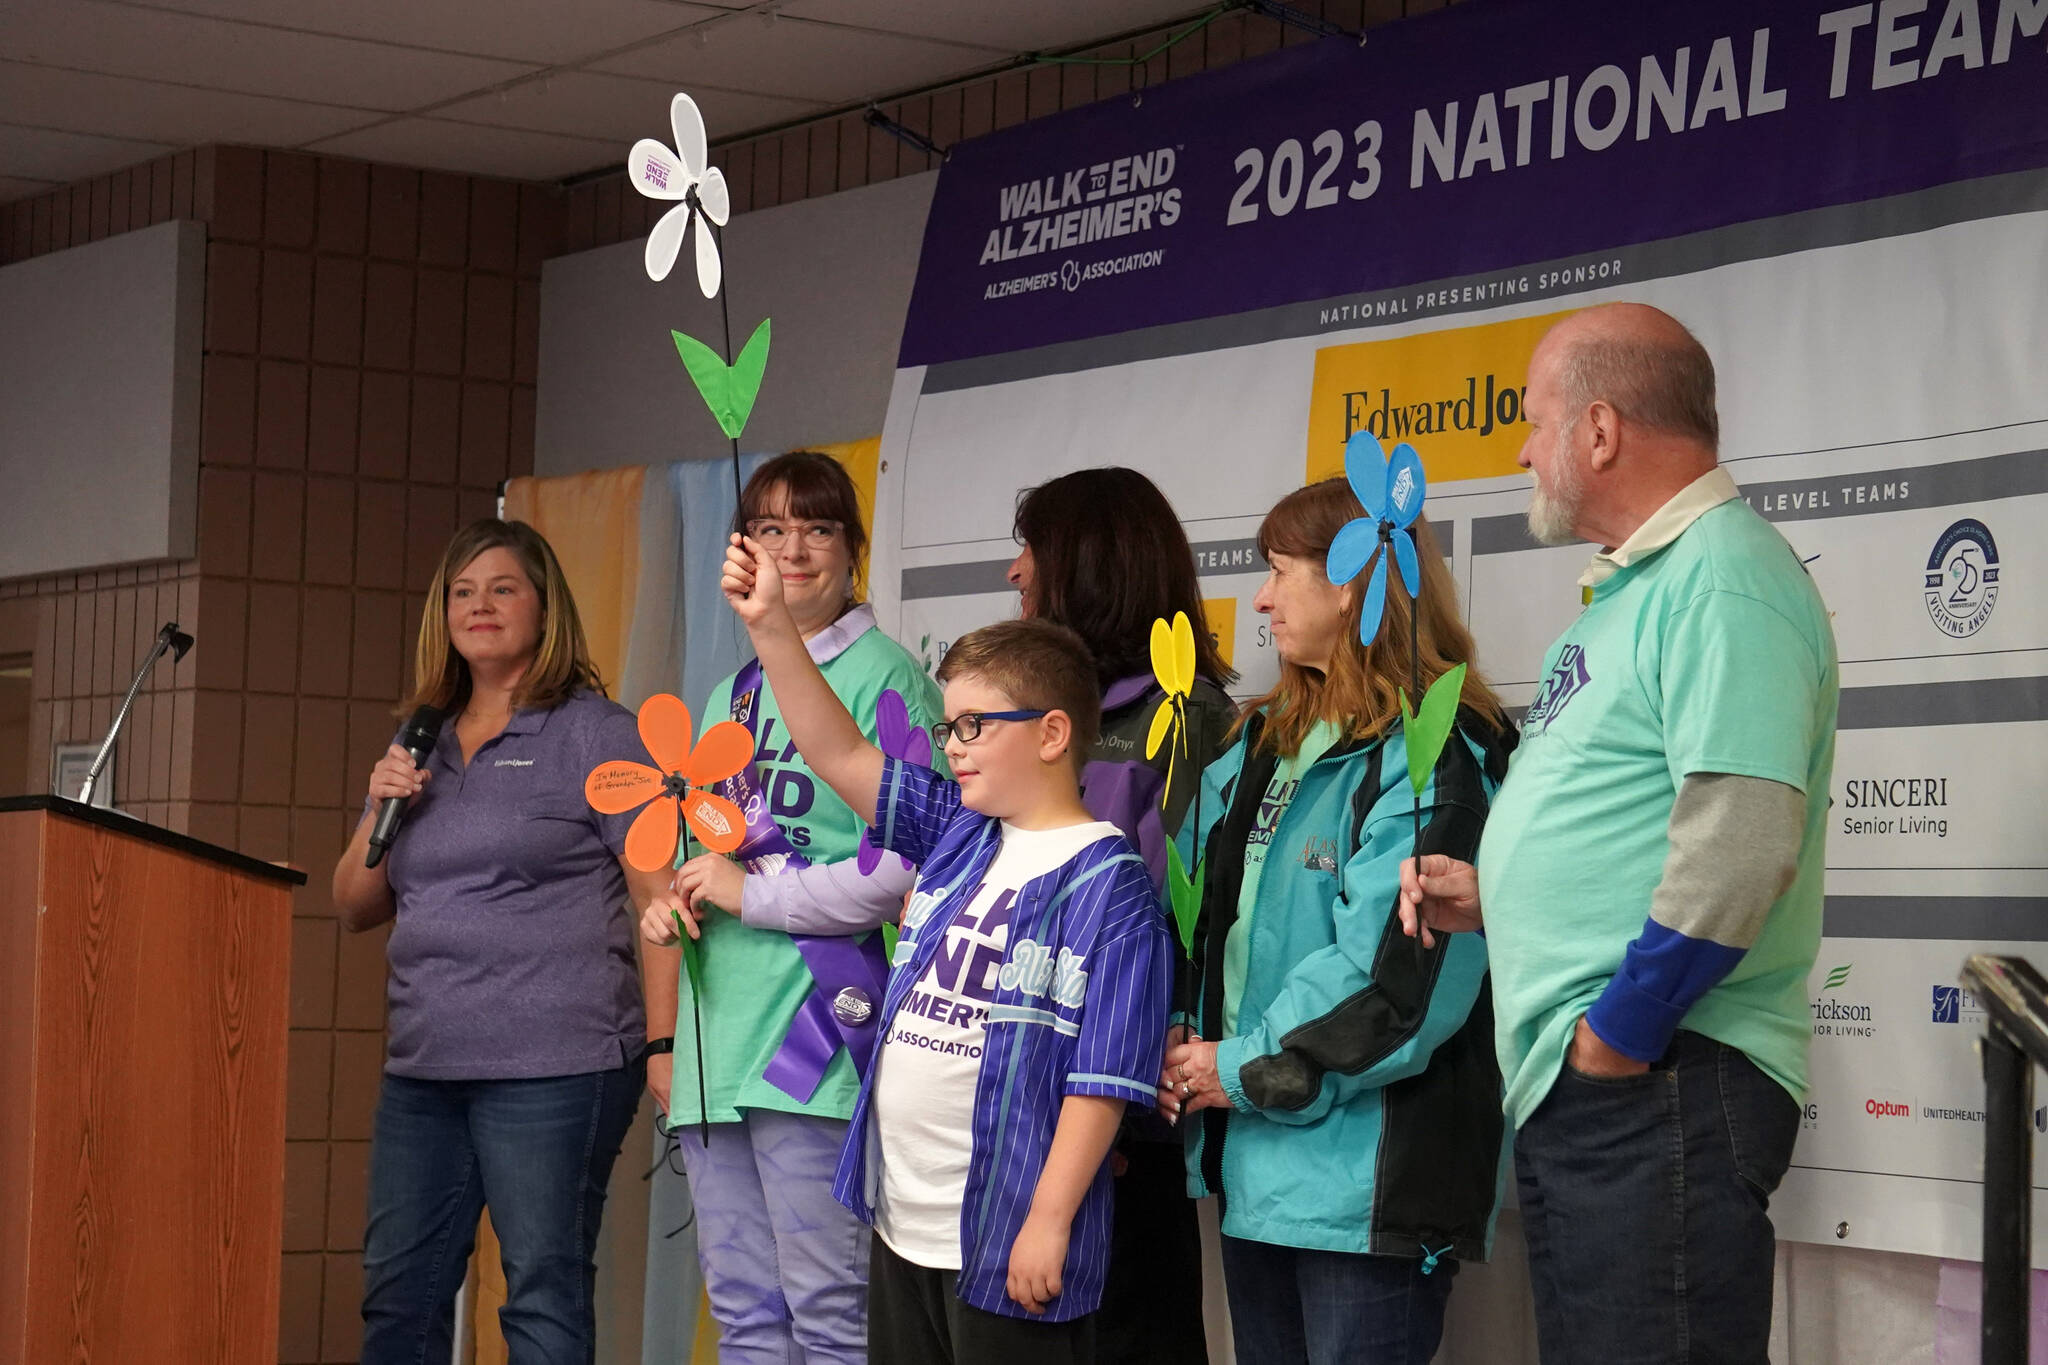 A promise garden flower ceremony is held for the Walk to End Alzheimer’s at the Soldotna Regional Sports Complex in Soldotna, Alaska, on Saturday, Sept. 16, 2023. (Jake Dye/Peninsula Clarion)